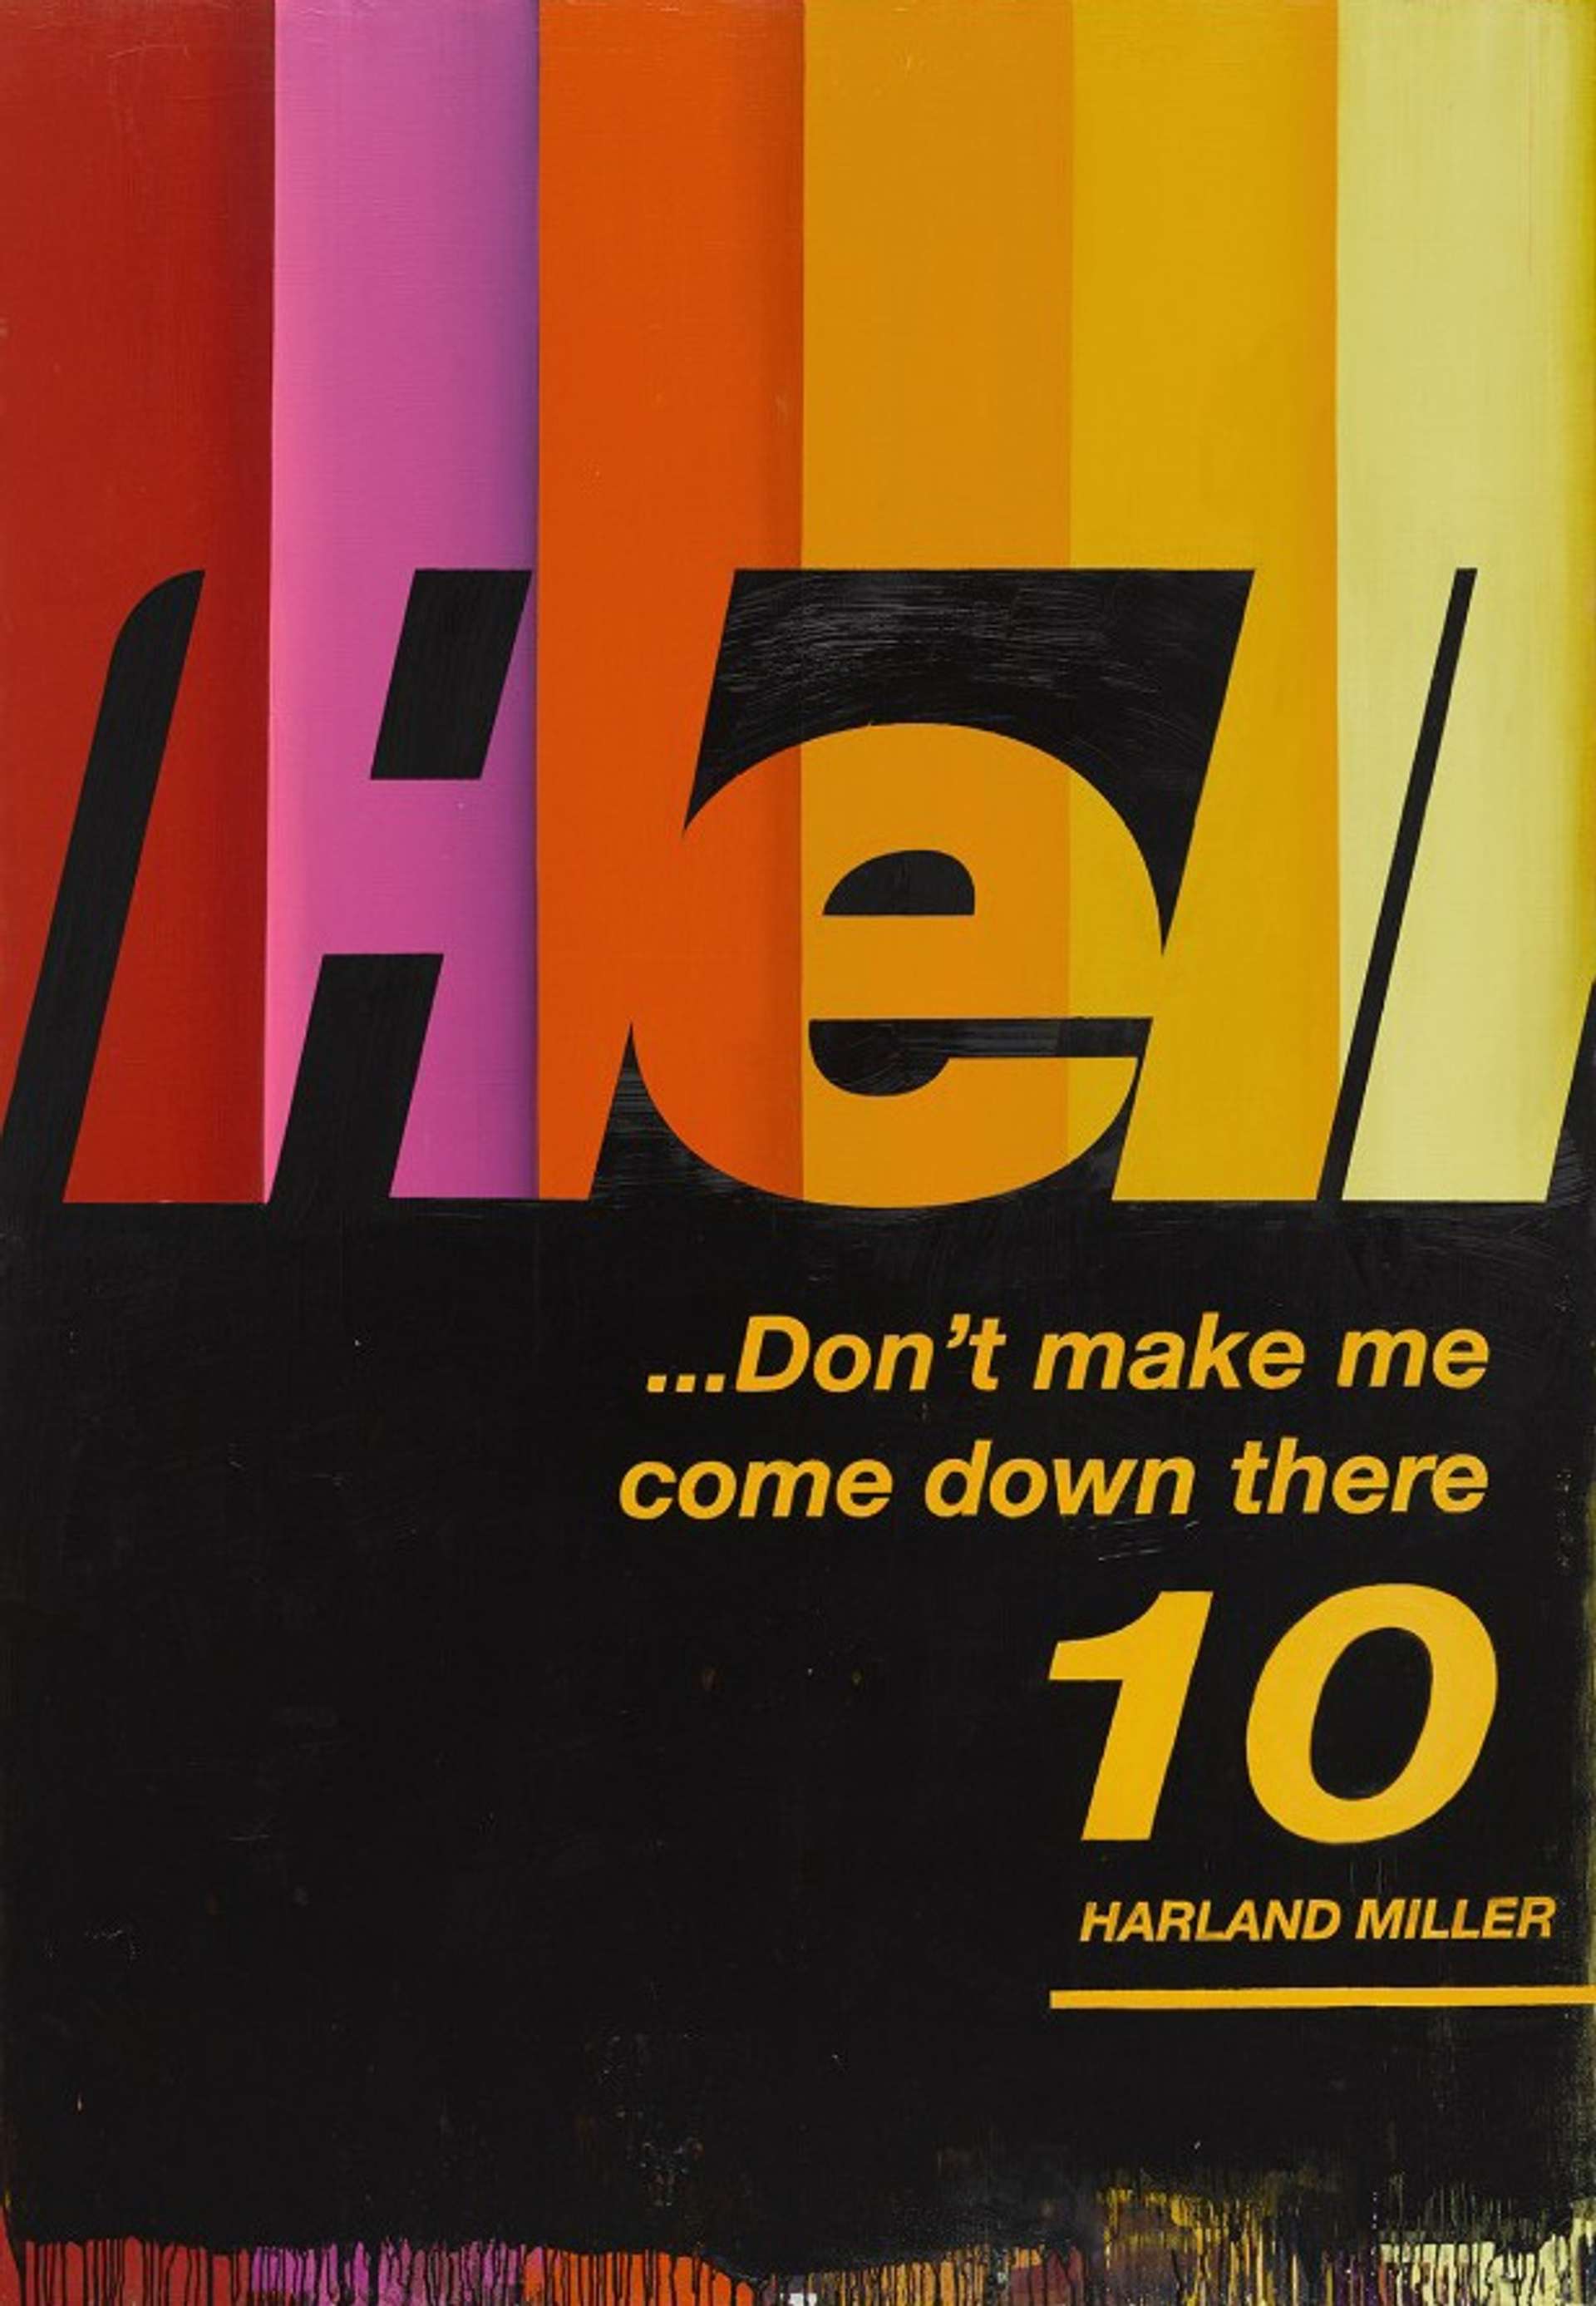 This print by Harland Miller shows the title in a warm gradient of pinks, reds and yellows, against a black background.